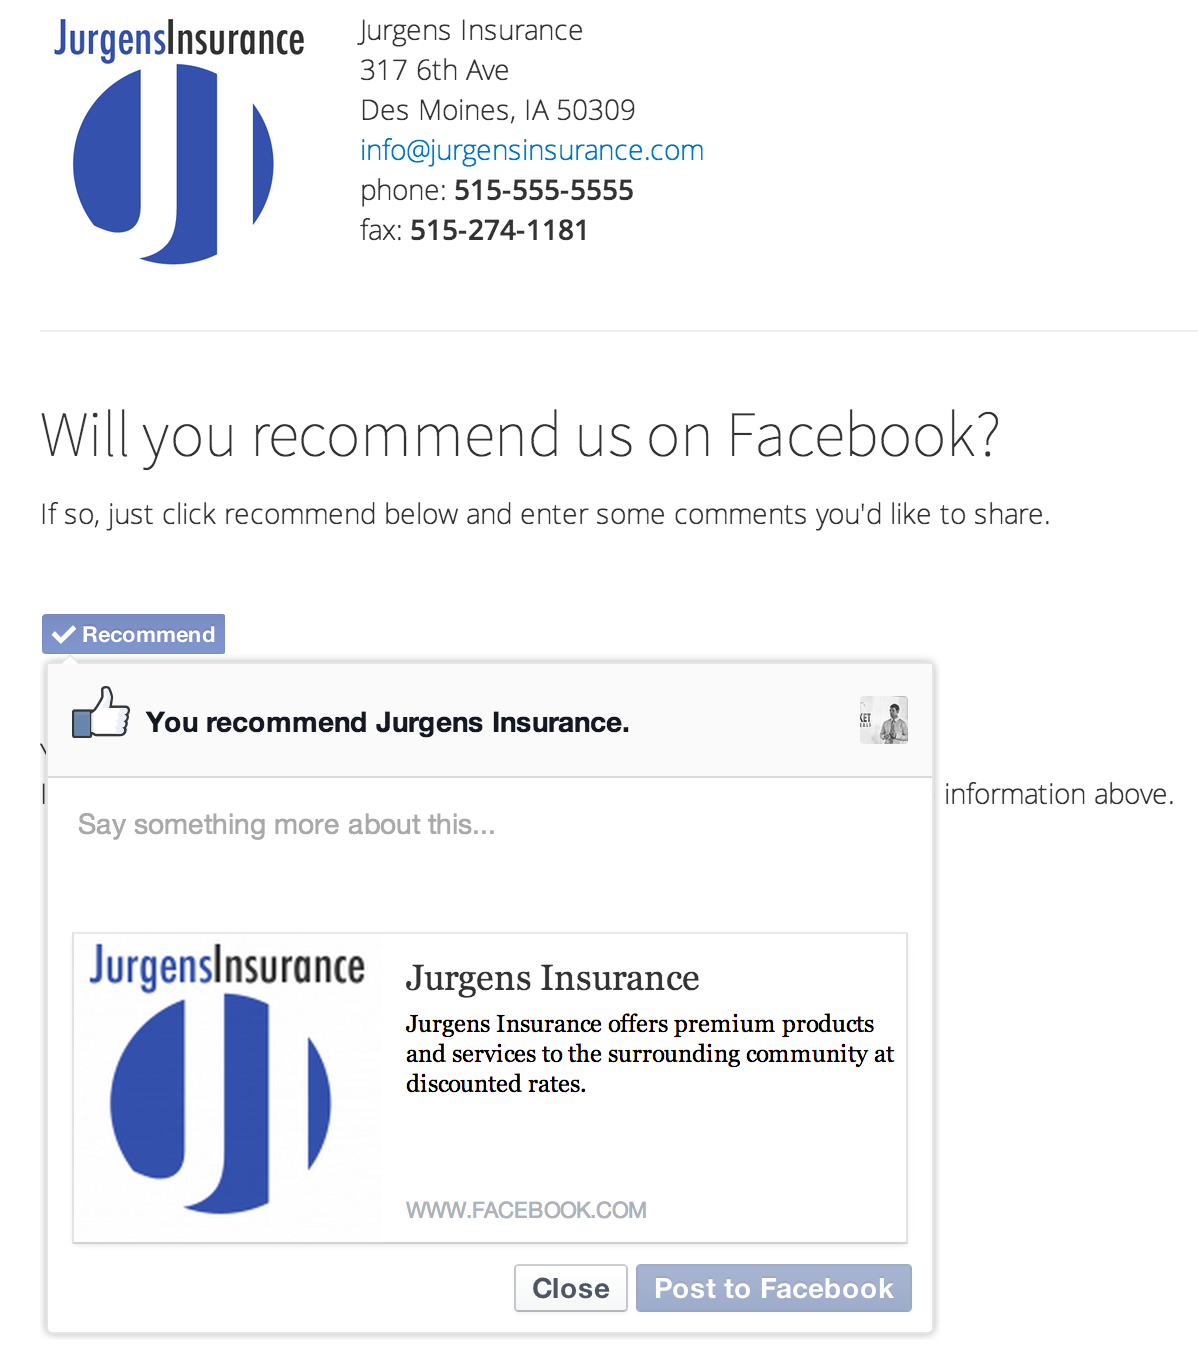 Demonstrates how a customer can recommend an agency on Facebook.